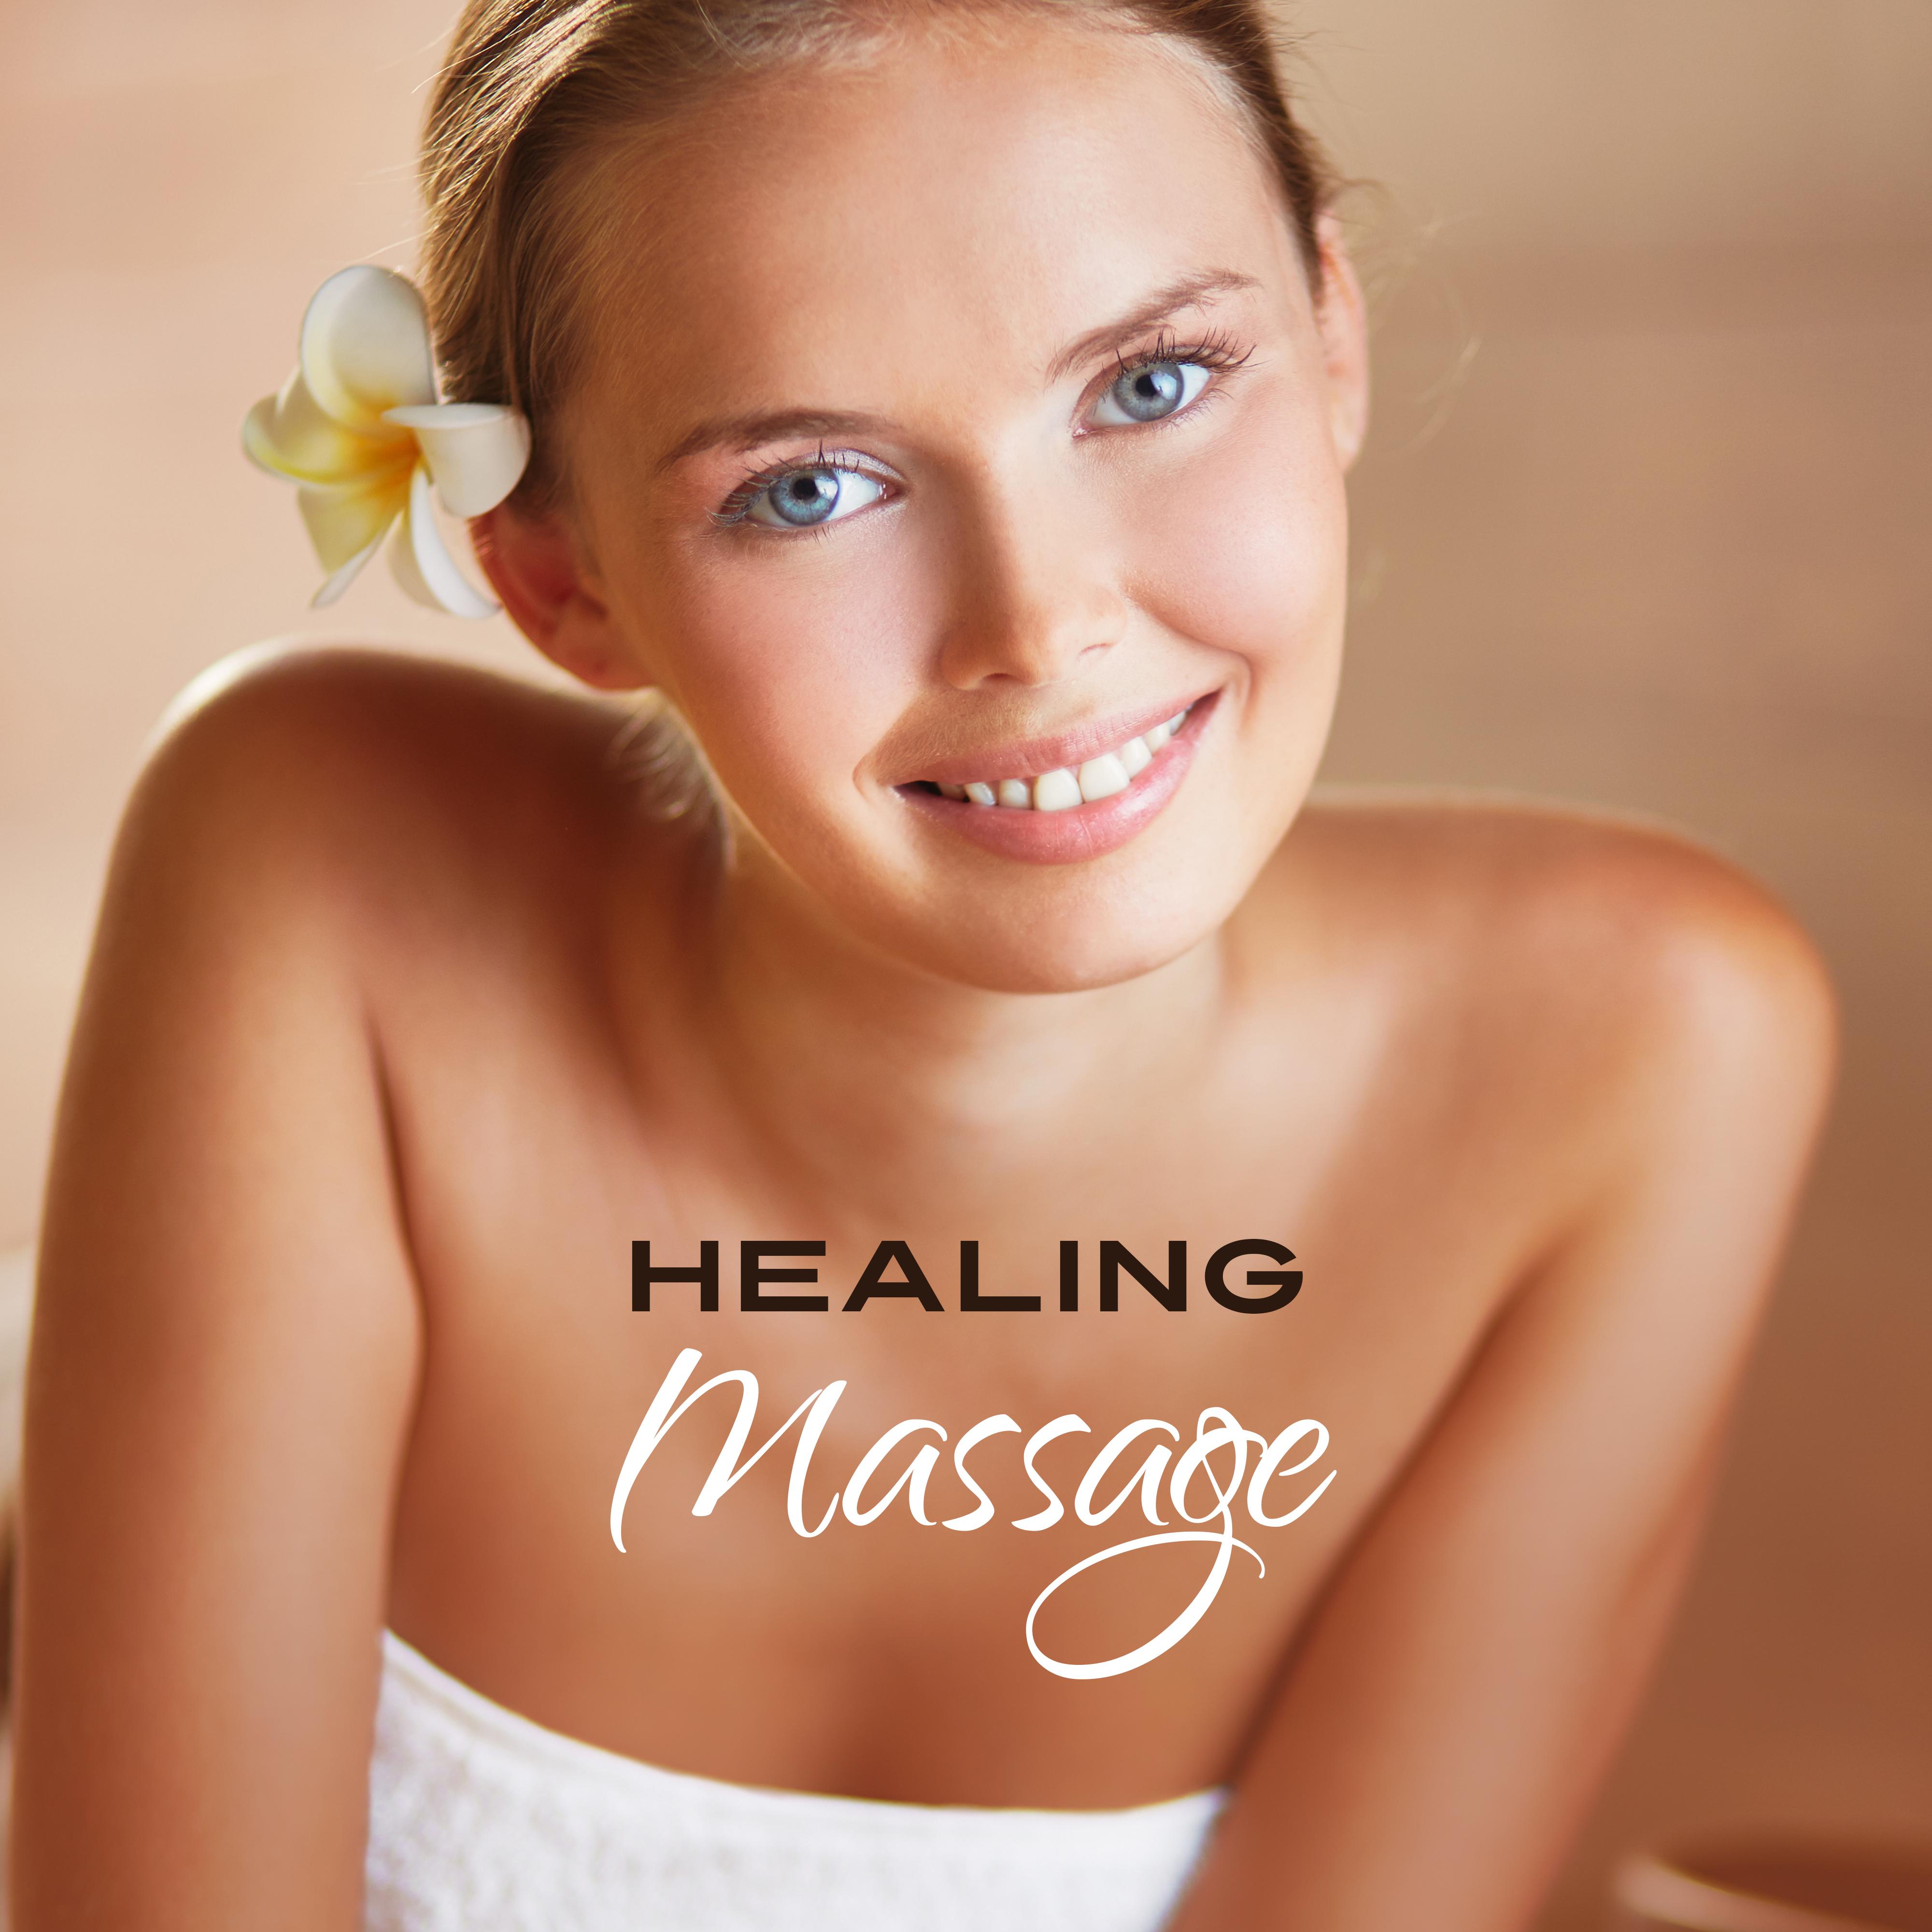 Healing Massage  Peaceful Spa Music, Pure Relaxation, Massage Therapy, Inner Zen, Nature Sounds, New Age